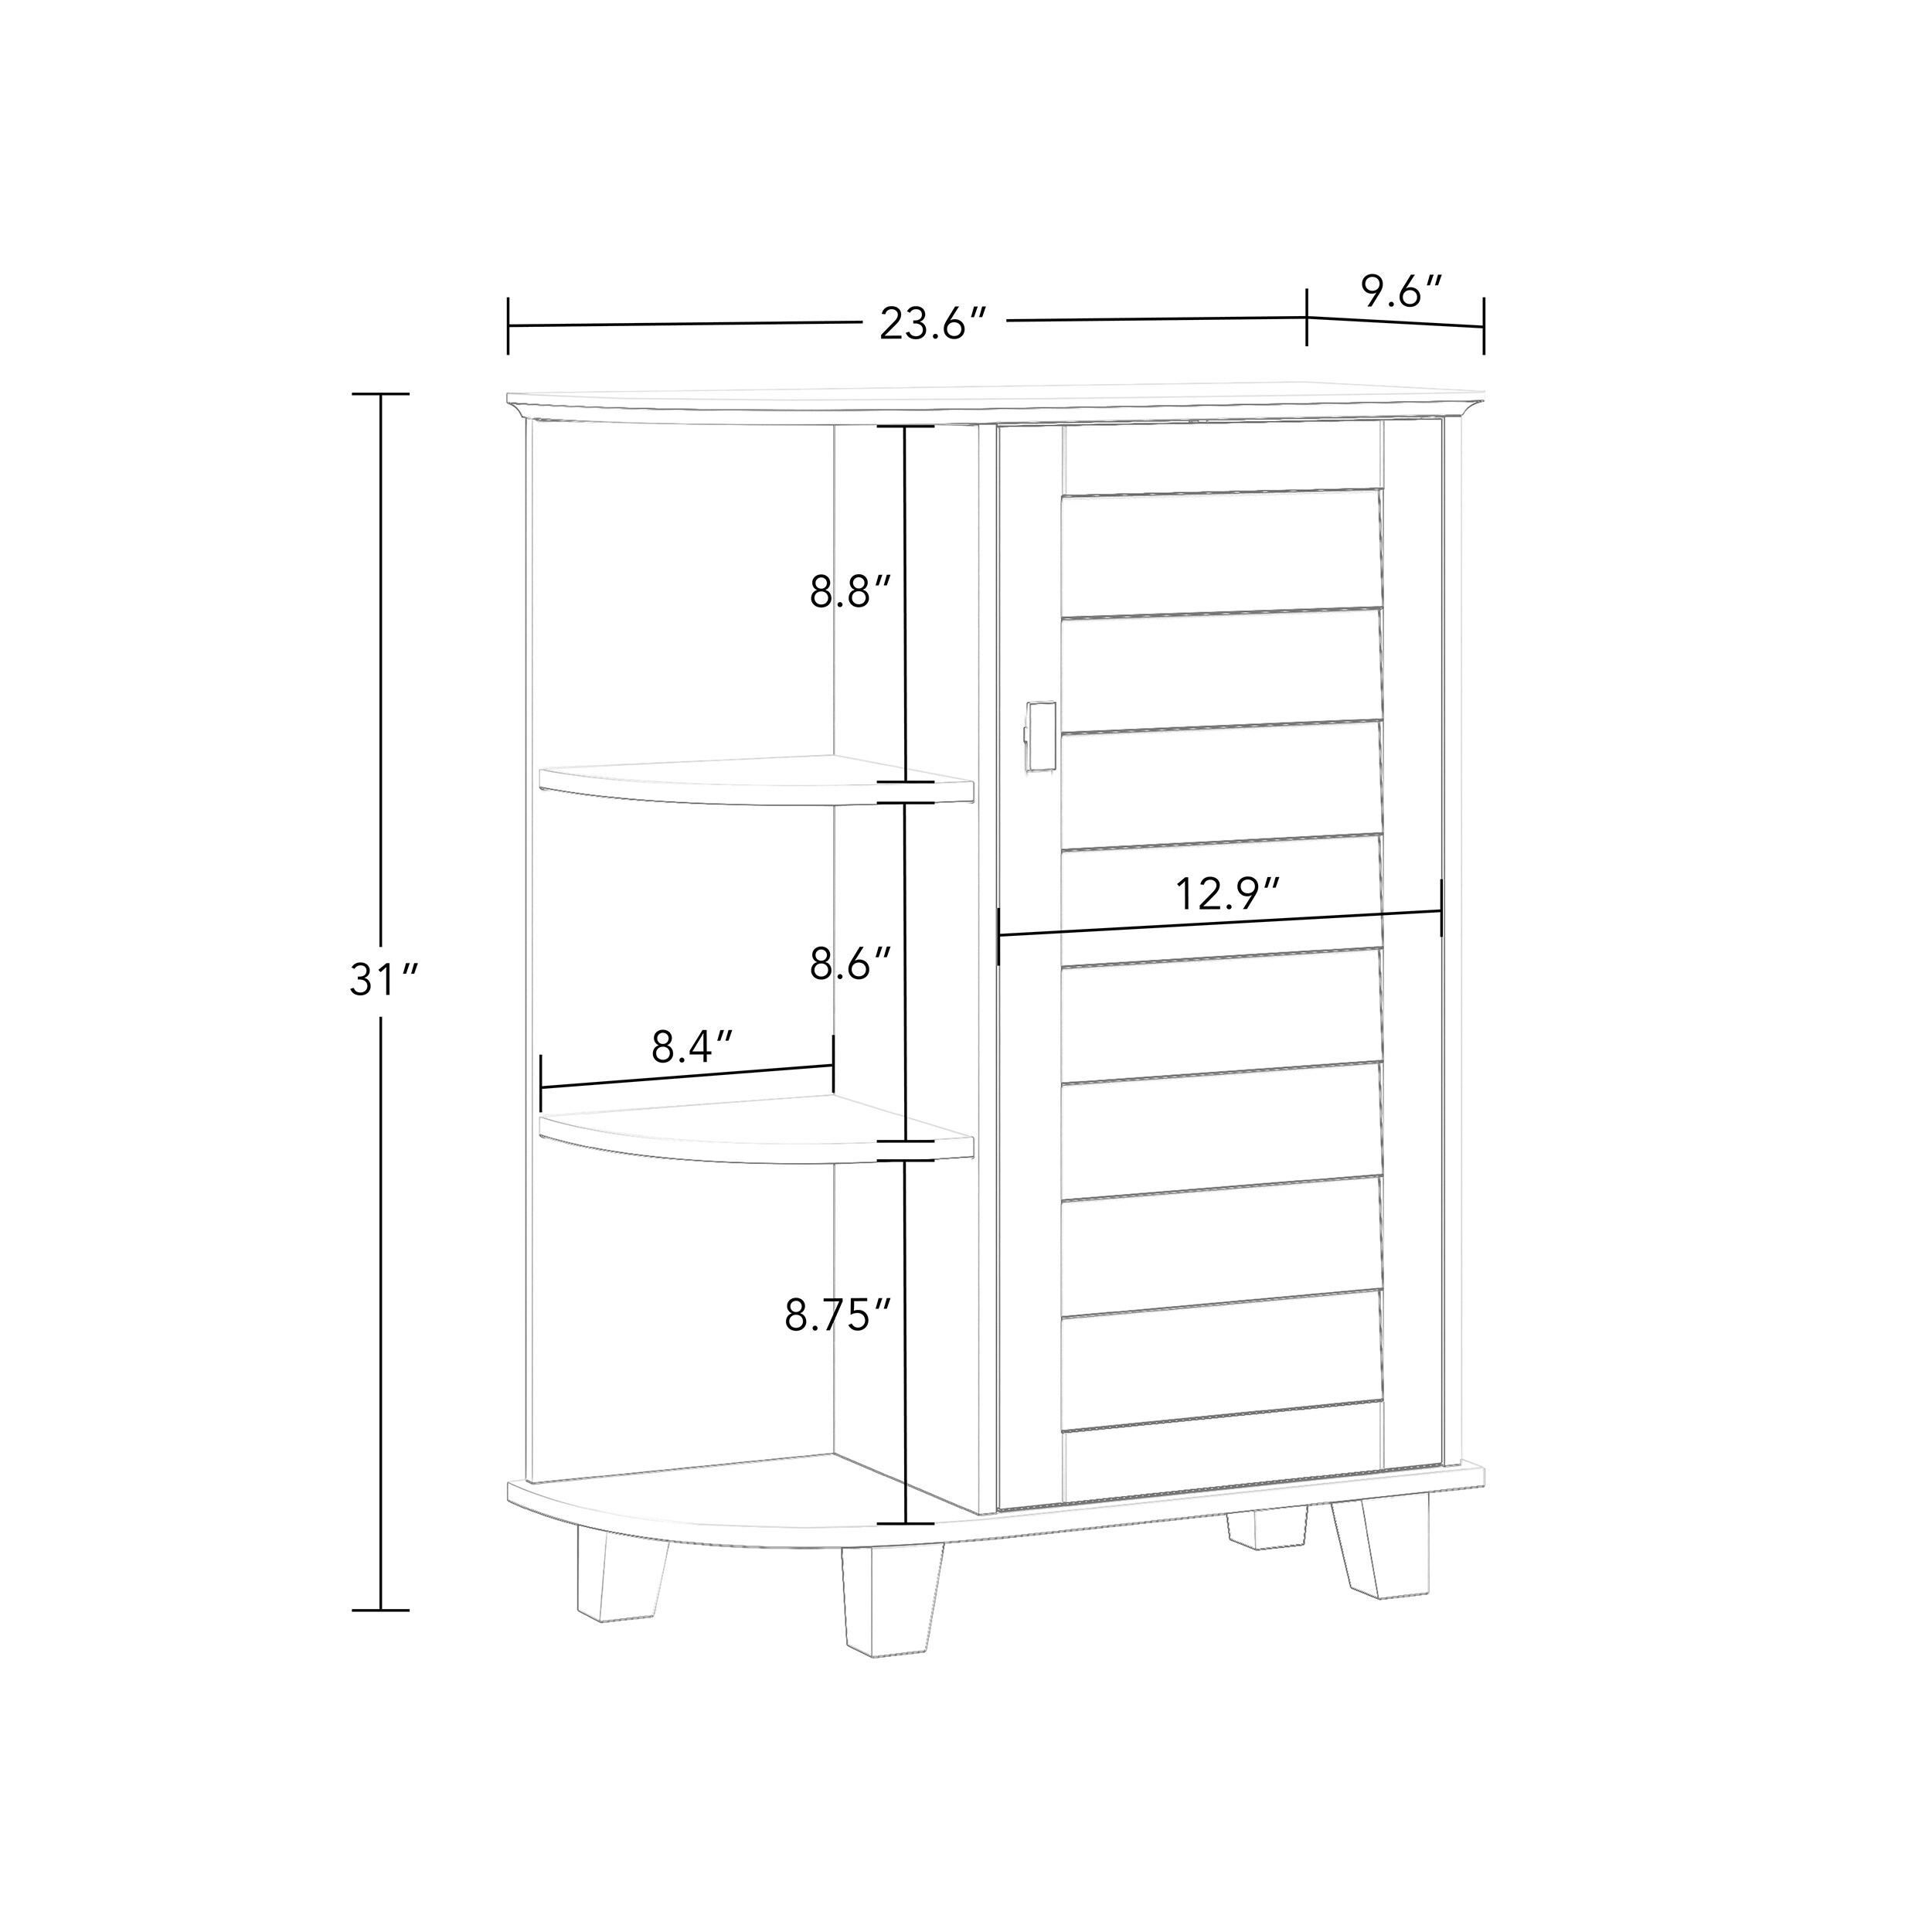 https://ak1.ostkcdn.com/images/products/is/images/direct/f341af10b078ae330de9660d3f932dc215e4ca92/RiverRidge-Brookfield-Single-Door-Floor-Storage-Cabinet-with-Side-Shelves%2C-White.jpg